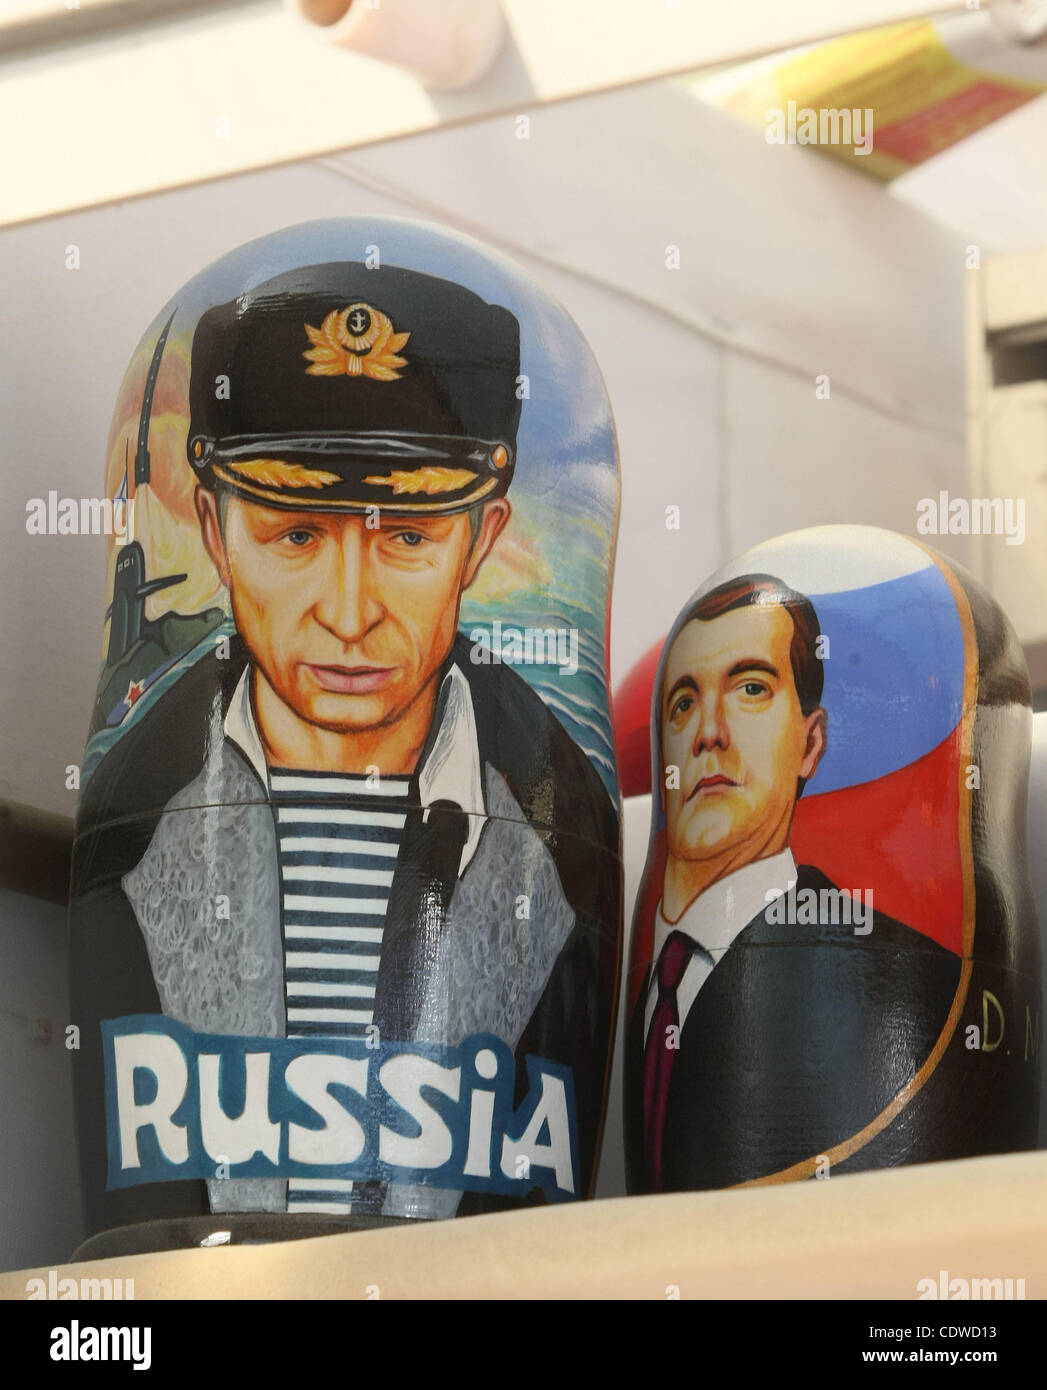 Russia`s 2012 Presidential Election Campaign starts. Pictured: Matryoshka dolls of Russia`s prime minister Vladimir Putin in Russian Navy uniform (l) and Russia`s President Dmitry Medvedev (r). Stock Photo